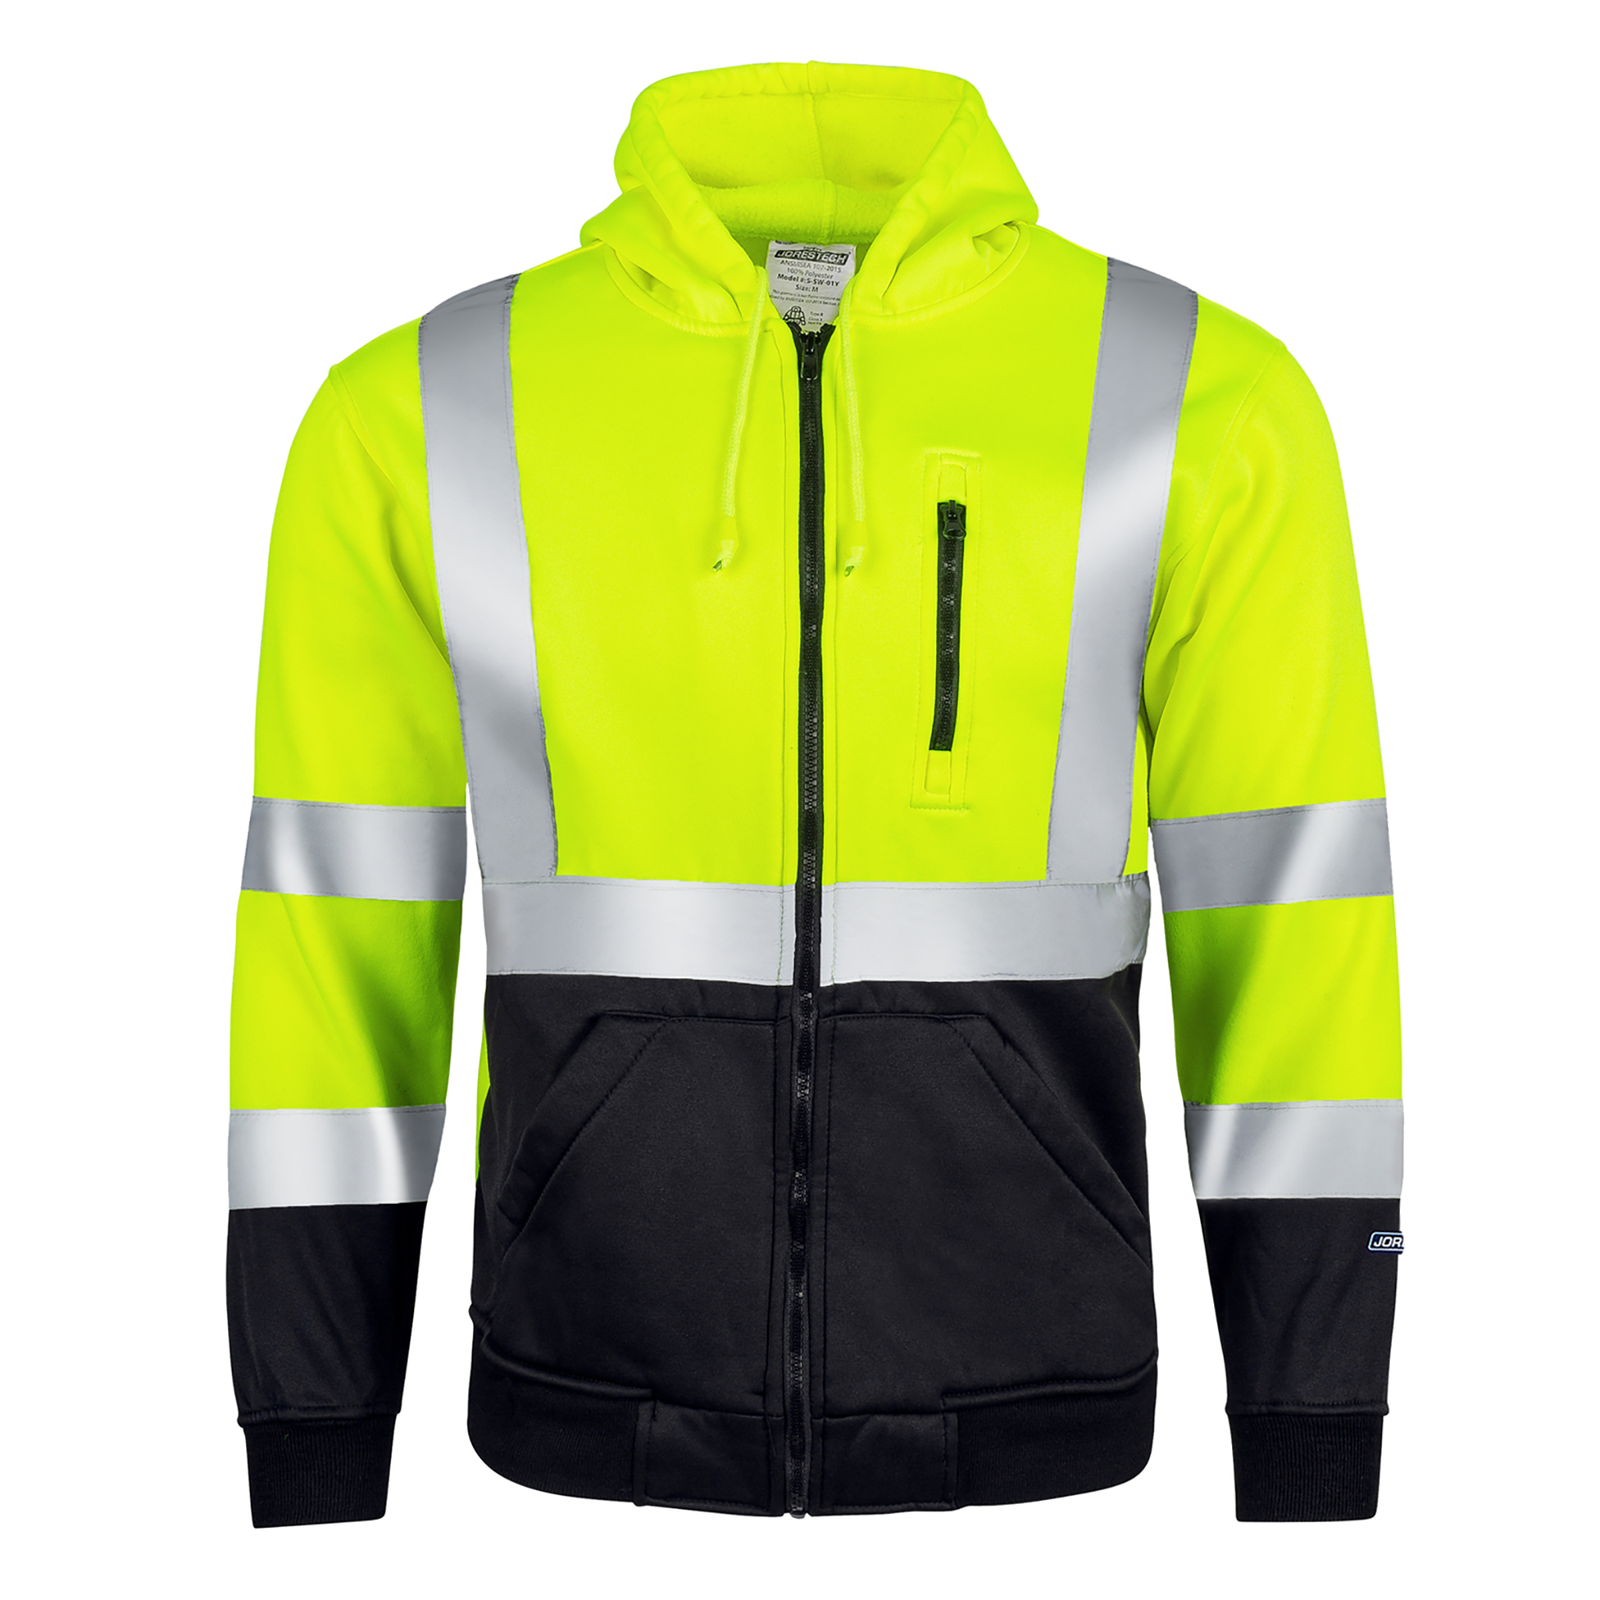 Front view of the JORESTECH hi-vis safety hooded yellow and black sweatshirt with reflective stripes and full zipper